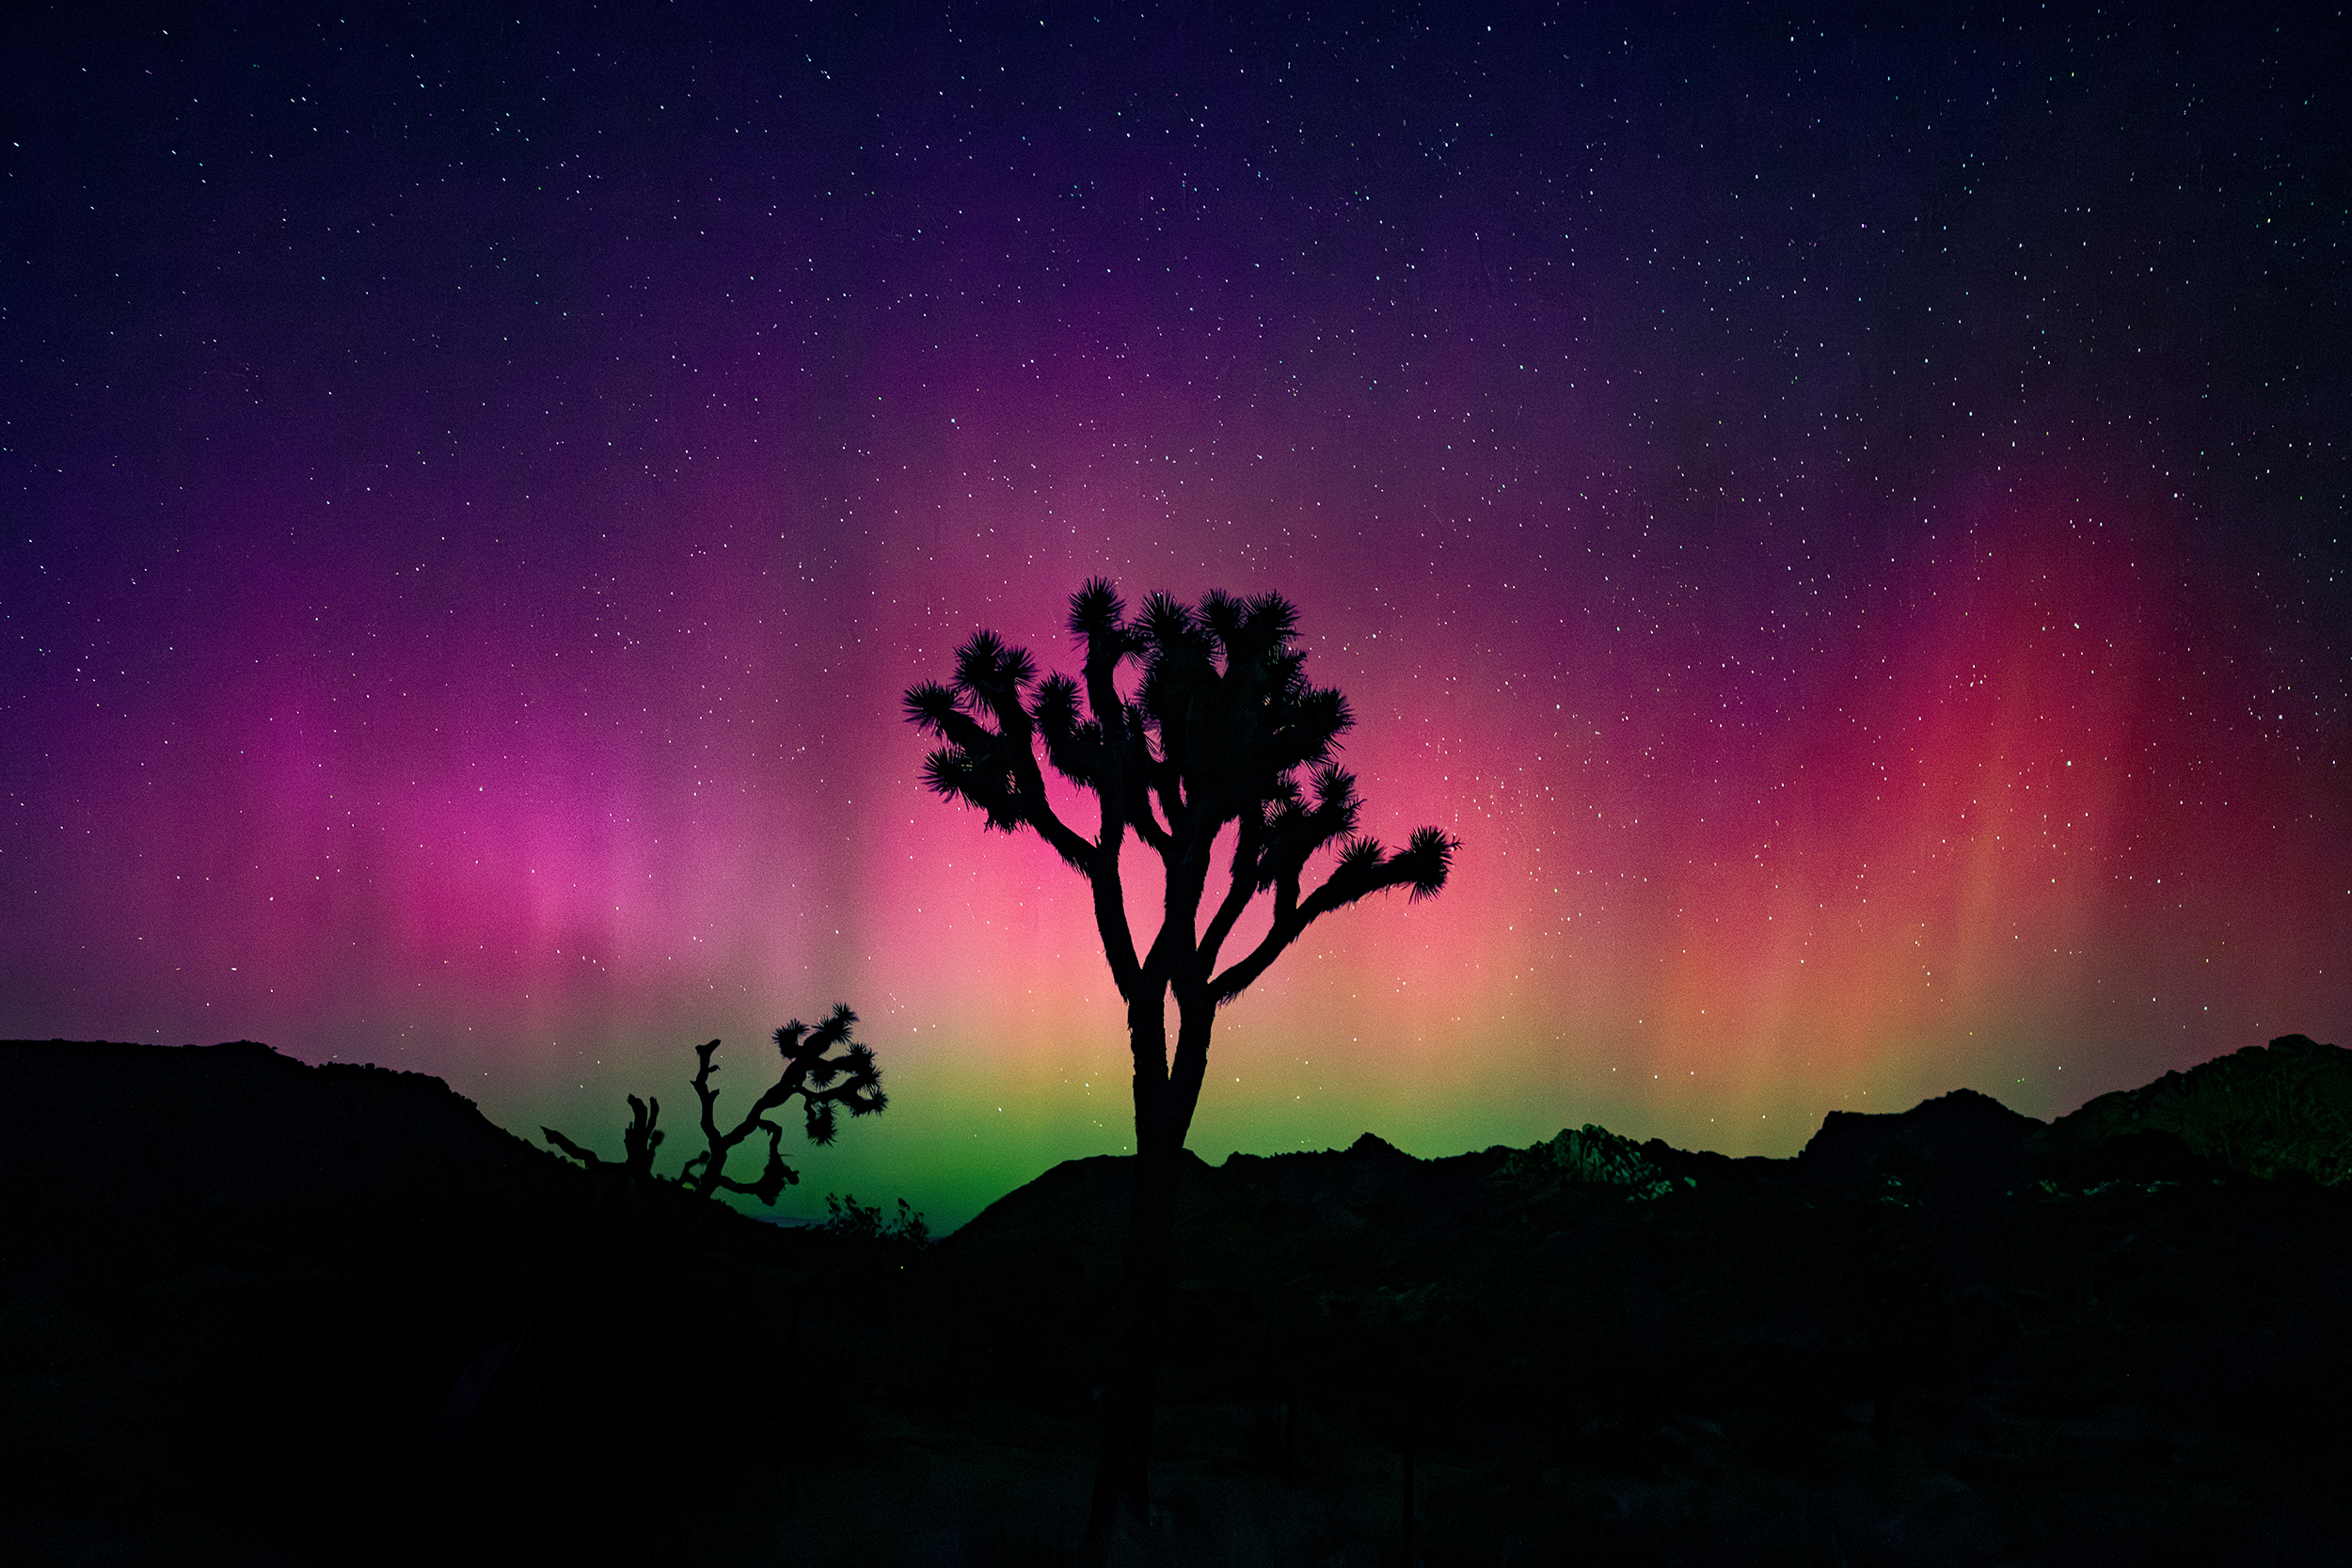 Aurora borealis, in shades of green leading up to orange, pink and dark purple, shines over a Joshua tree in Joshua Tree National Park. Photo by Erik Jepsen